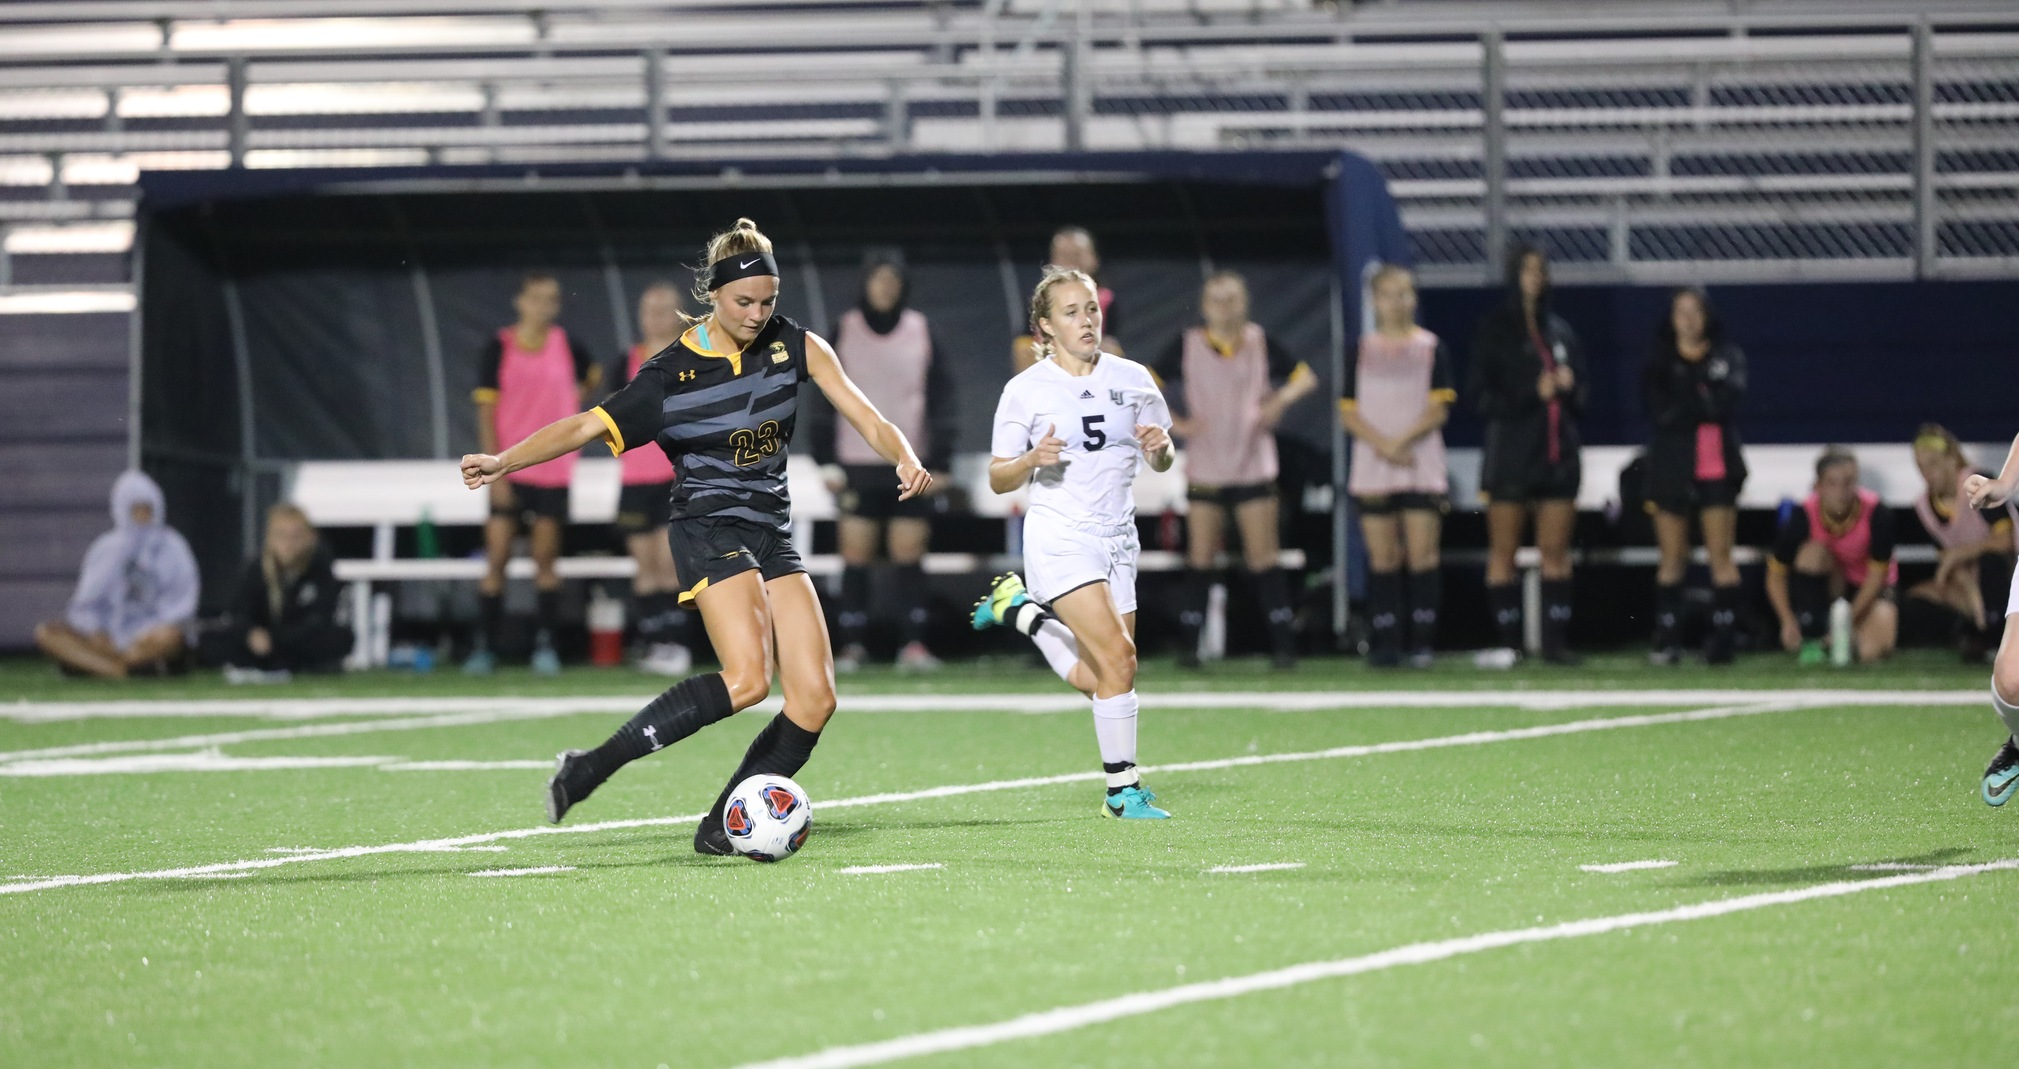 Delaney Karl had the Titans' lone shot on goal against the Spartans.